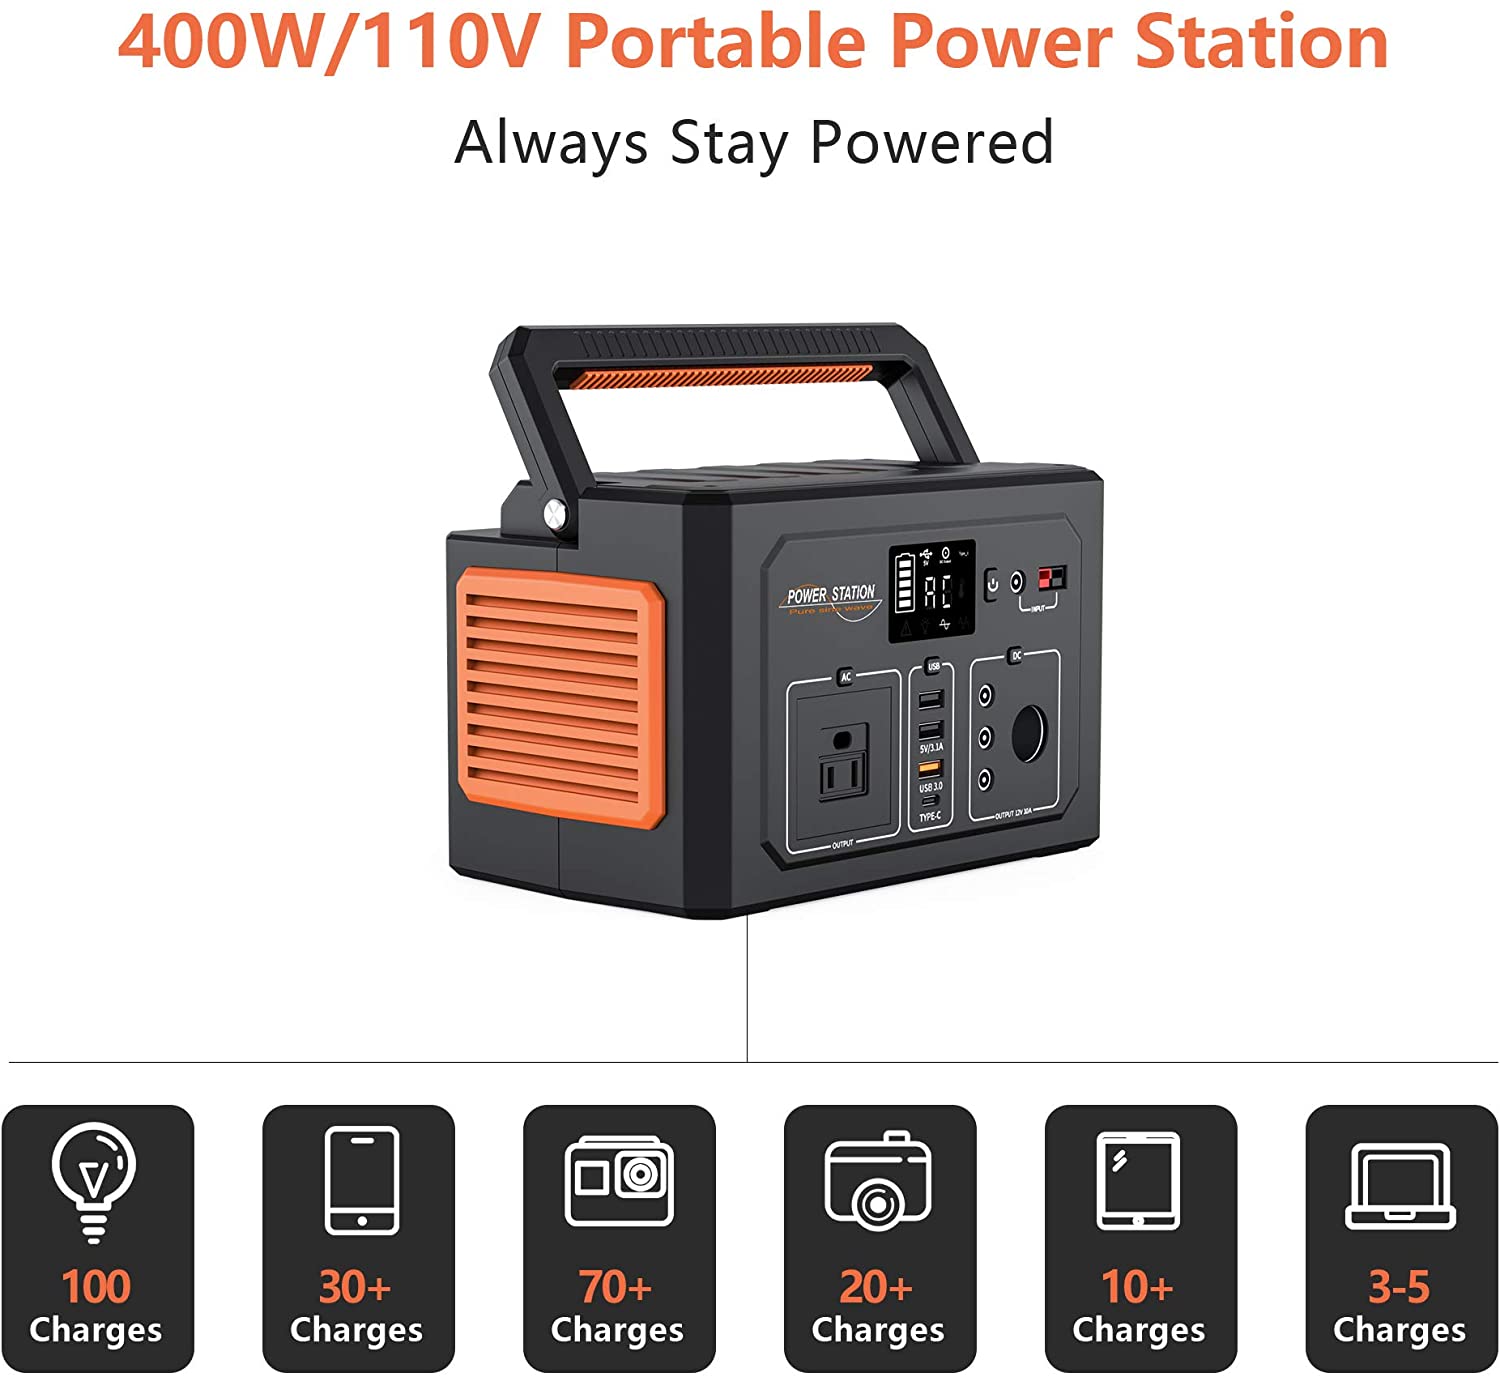 Portable Generator Power Station 500, 110V/520Wh 3 Charging ways & 9 Outlets, LED Display & Flashlight, Mobile Solar Generator (Solar Panel Optional), for CAPA Outdoors Camping Travel Emergency